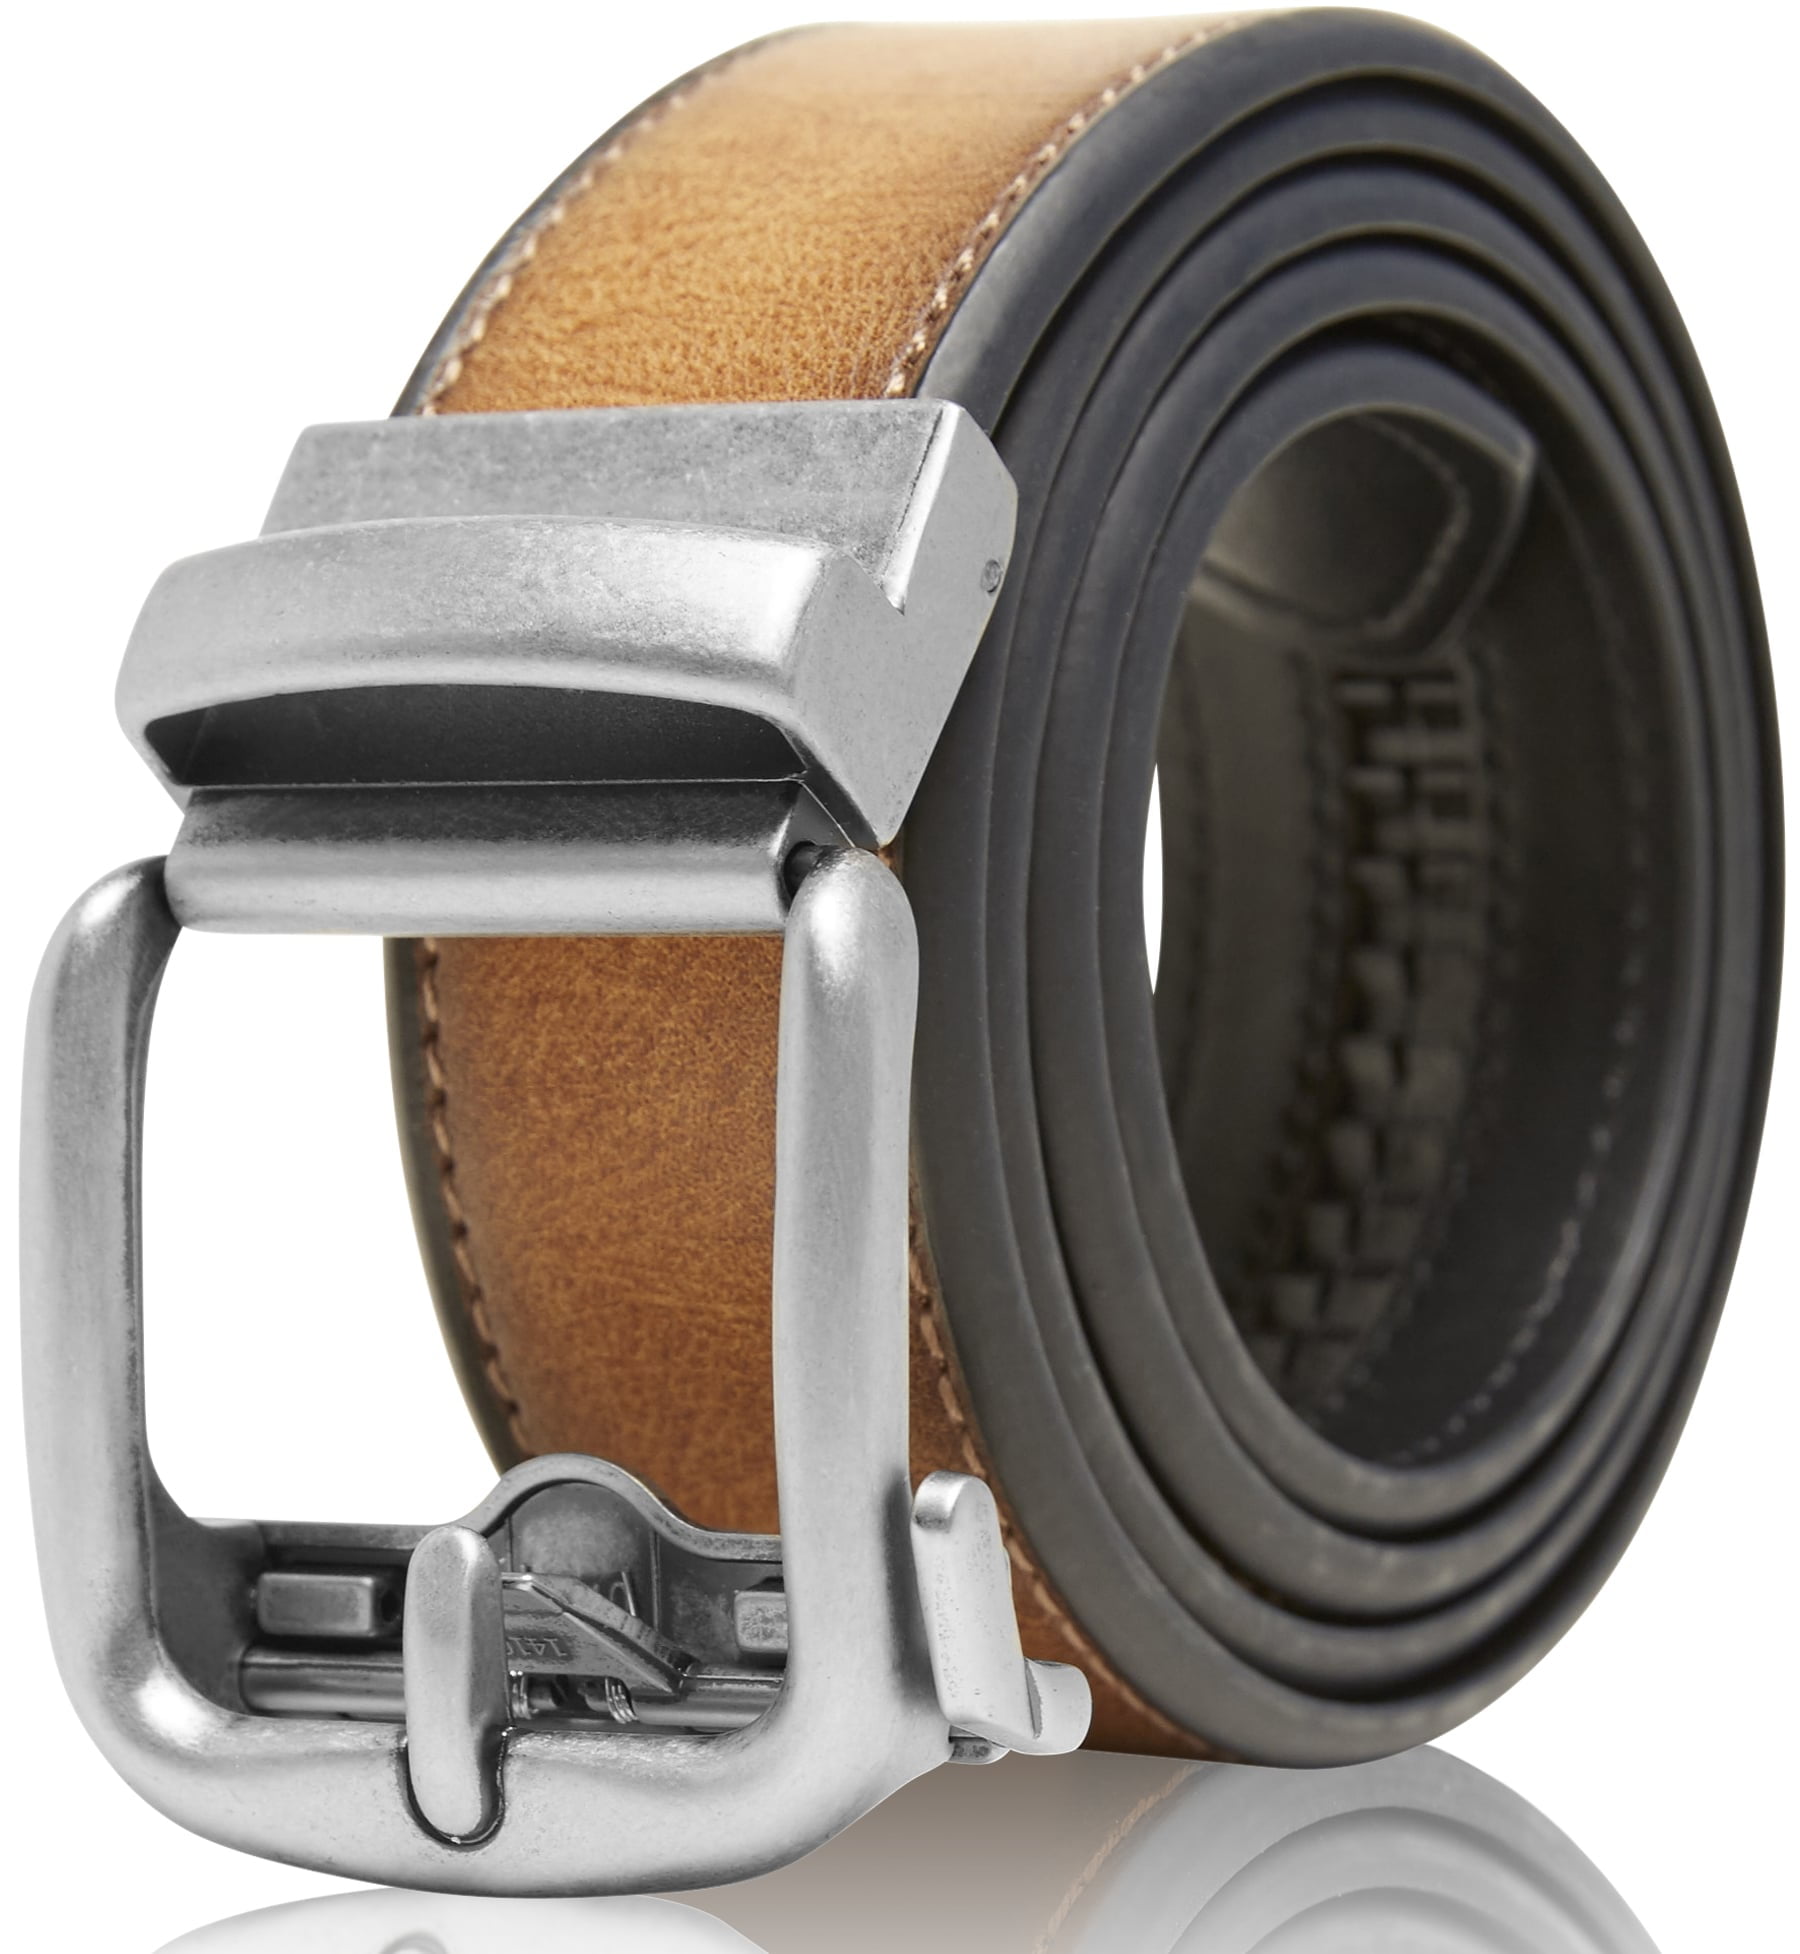 MENS NEW HIGH QUALITY BONDED LEATHER BELT DESIGNED WITH SILVER BUCKLE 